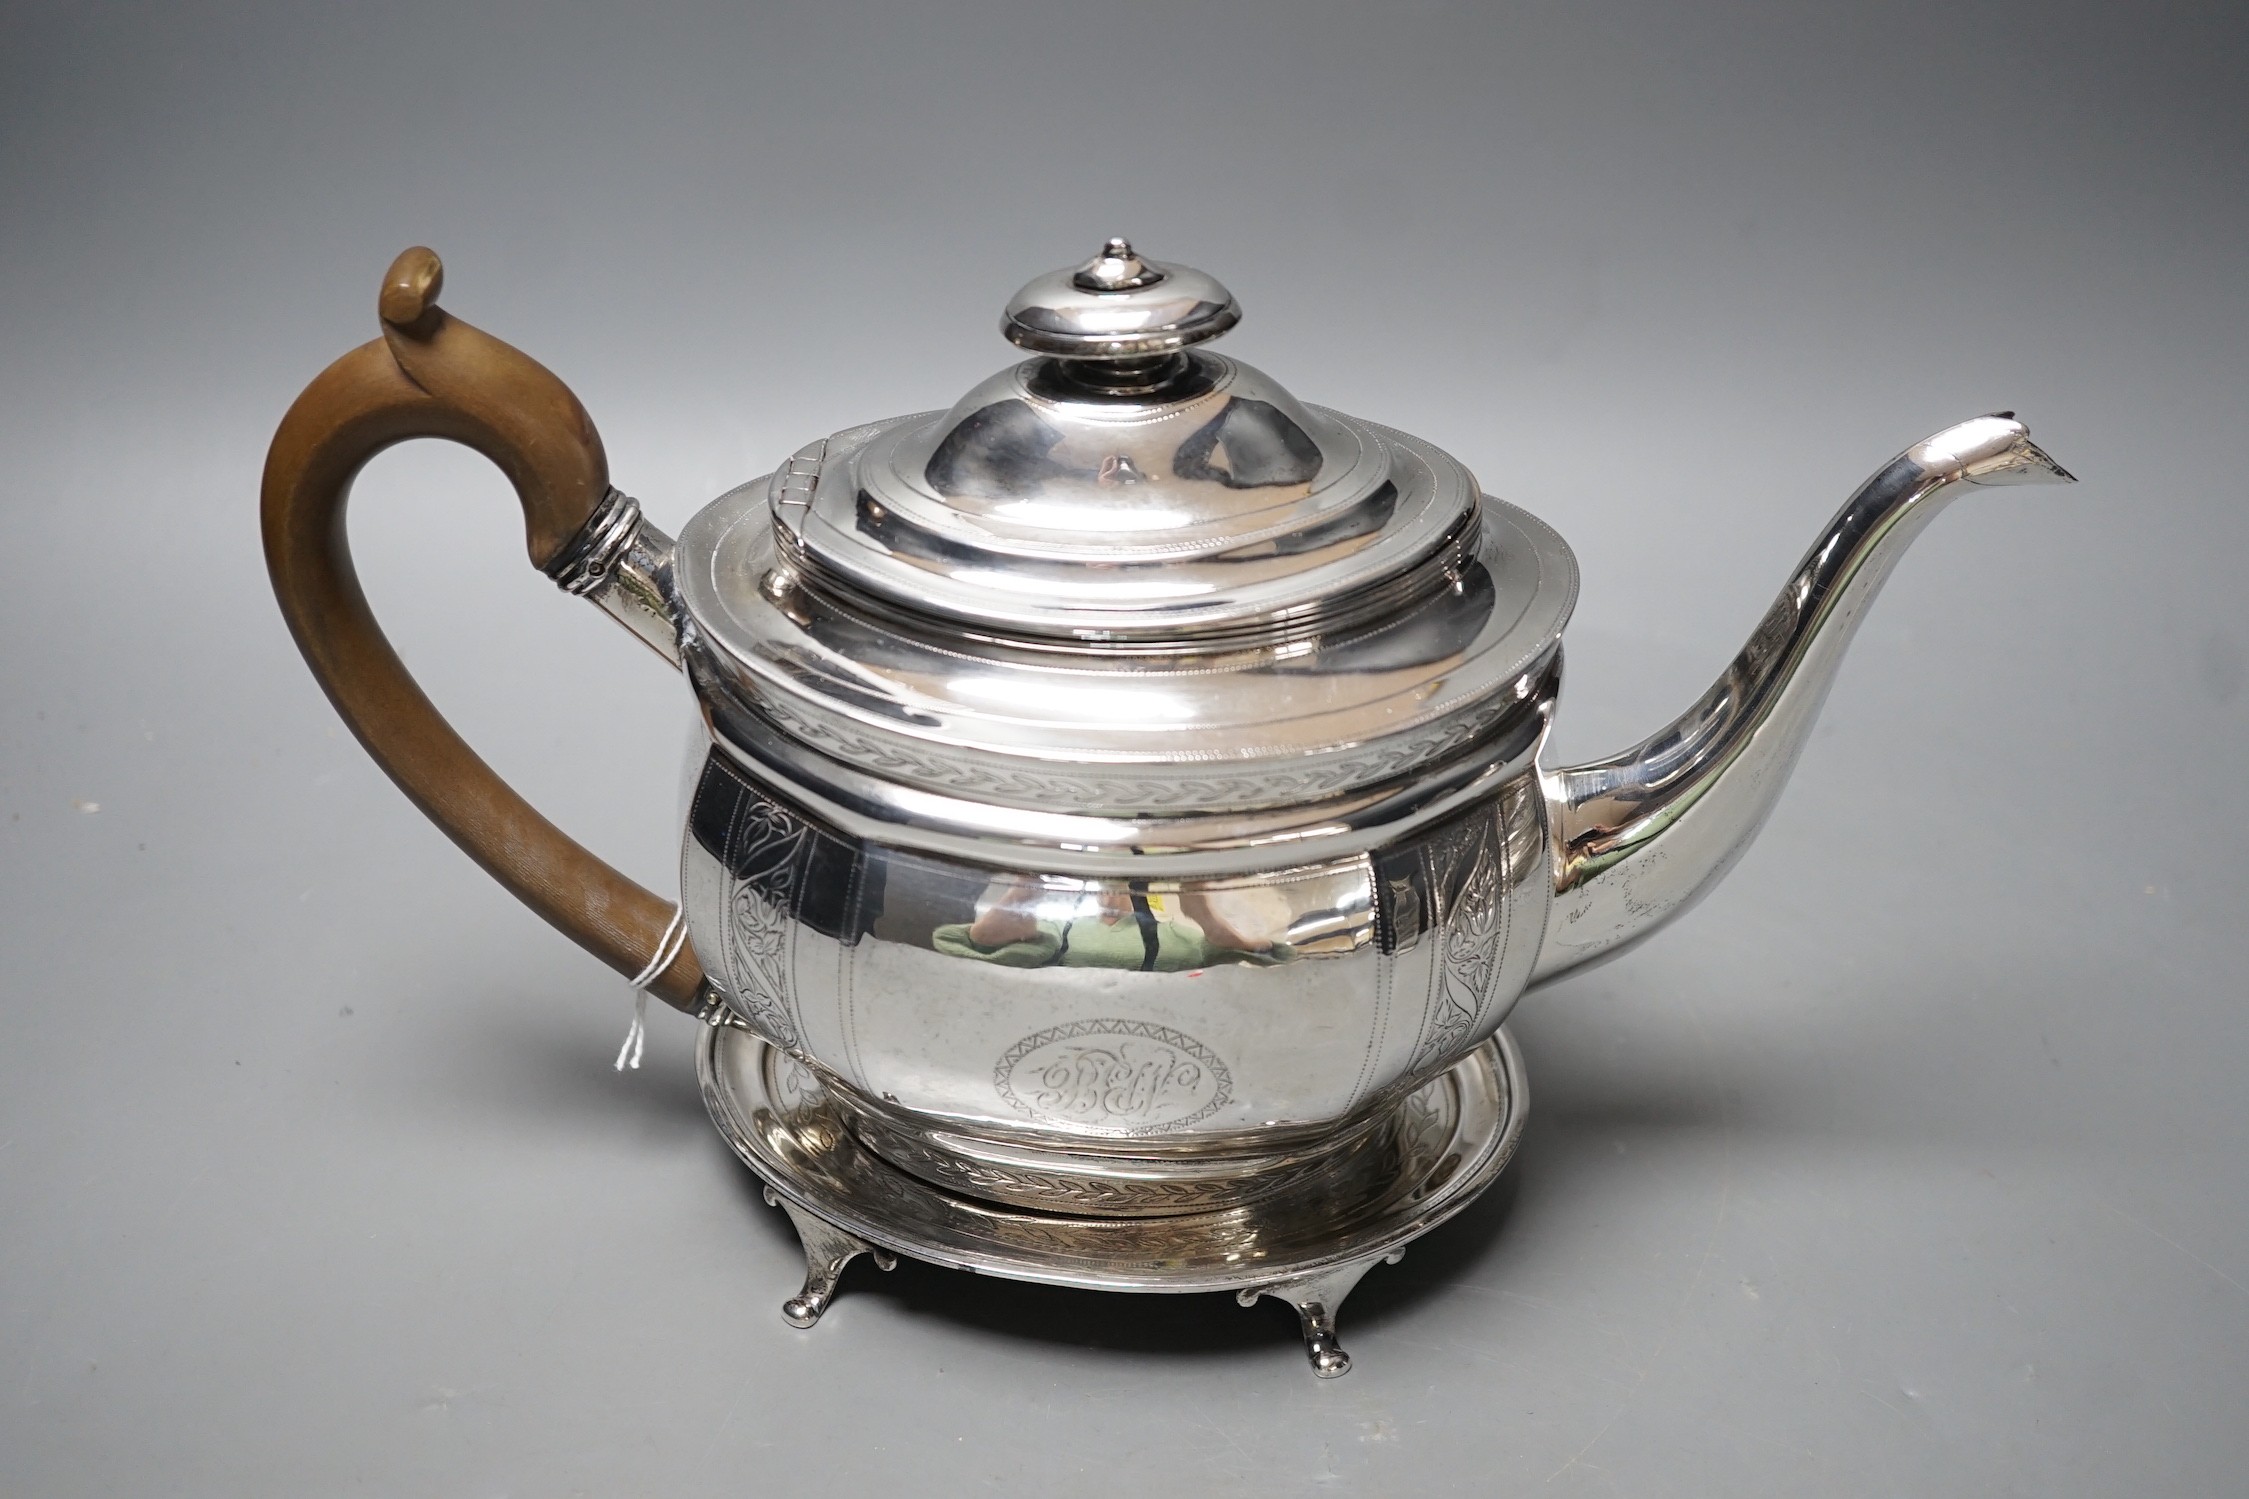 A George III engraved silver oval teapot, Alice & George Burroughs?, London, 1804 and an associated oval silver stand, James Darquits, London, 1805, gross weight 18.3oz.